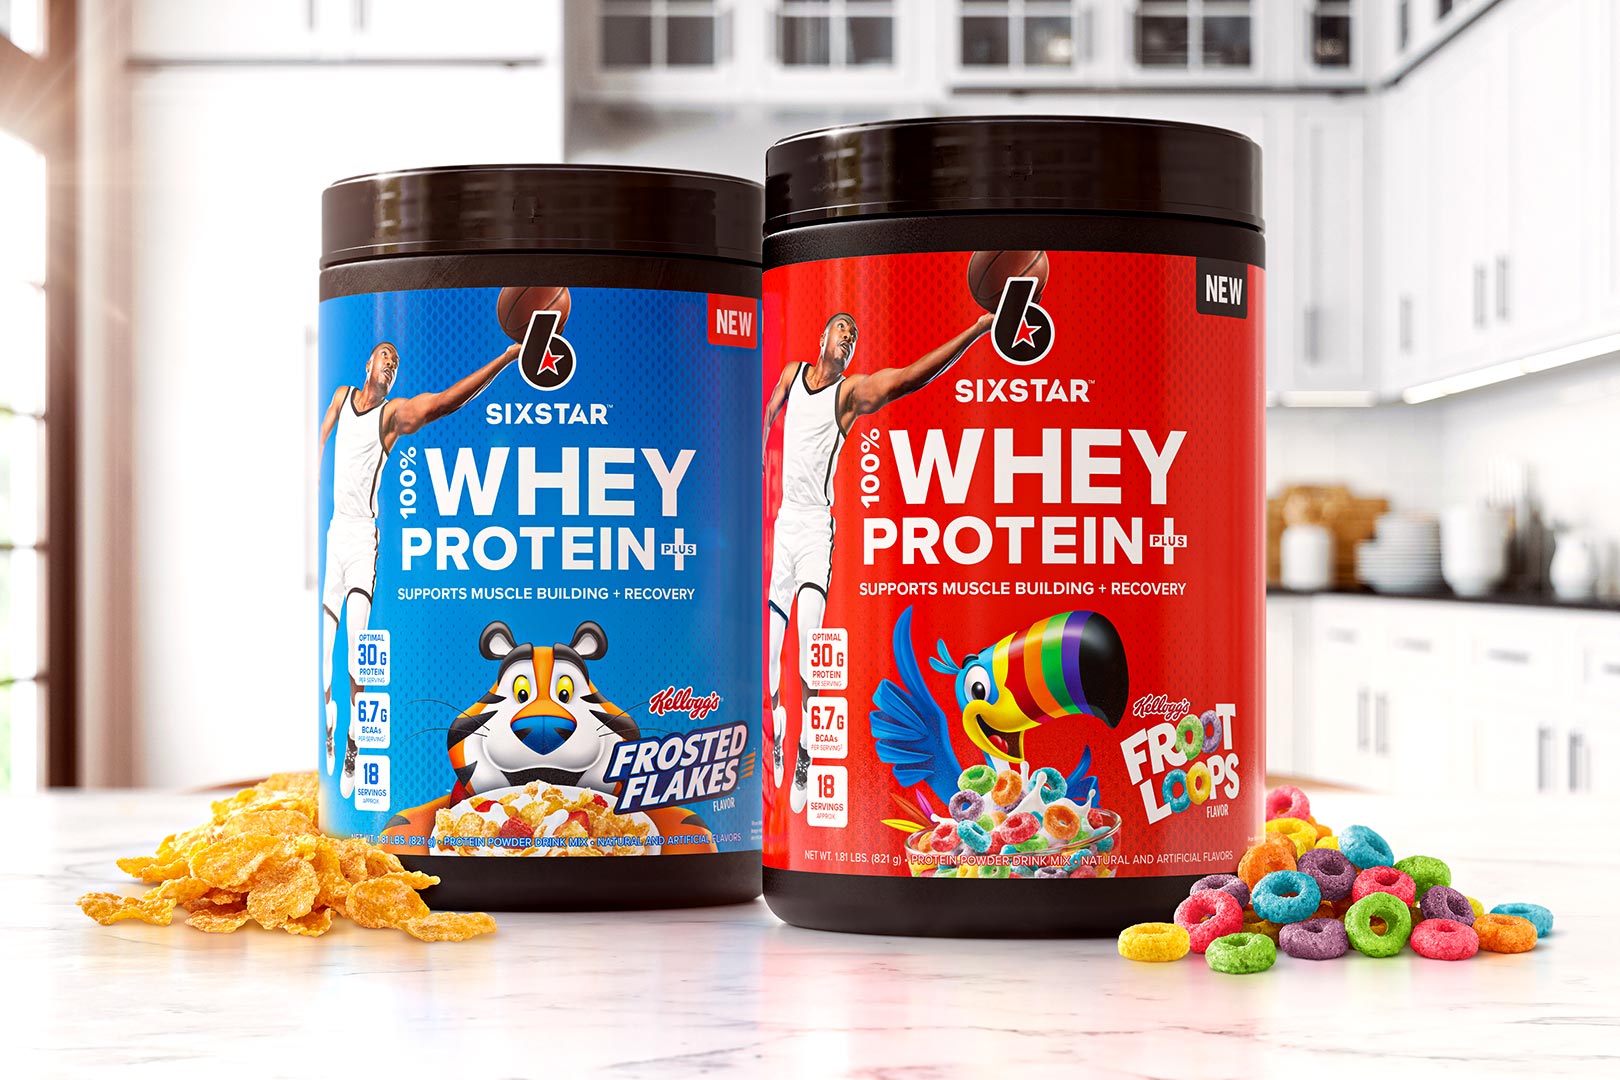 Six Star Pro Nutrition' Froot Loops and Frosted Flakes protein